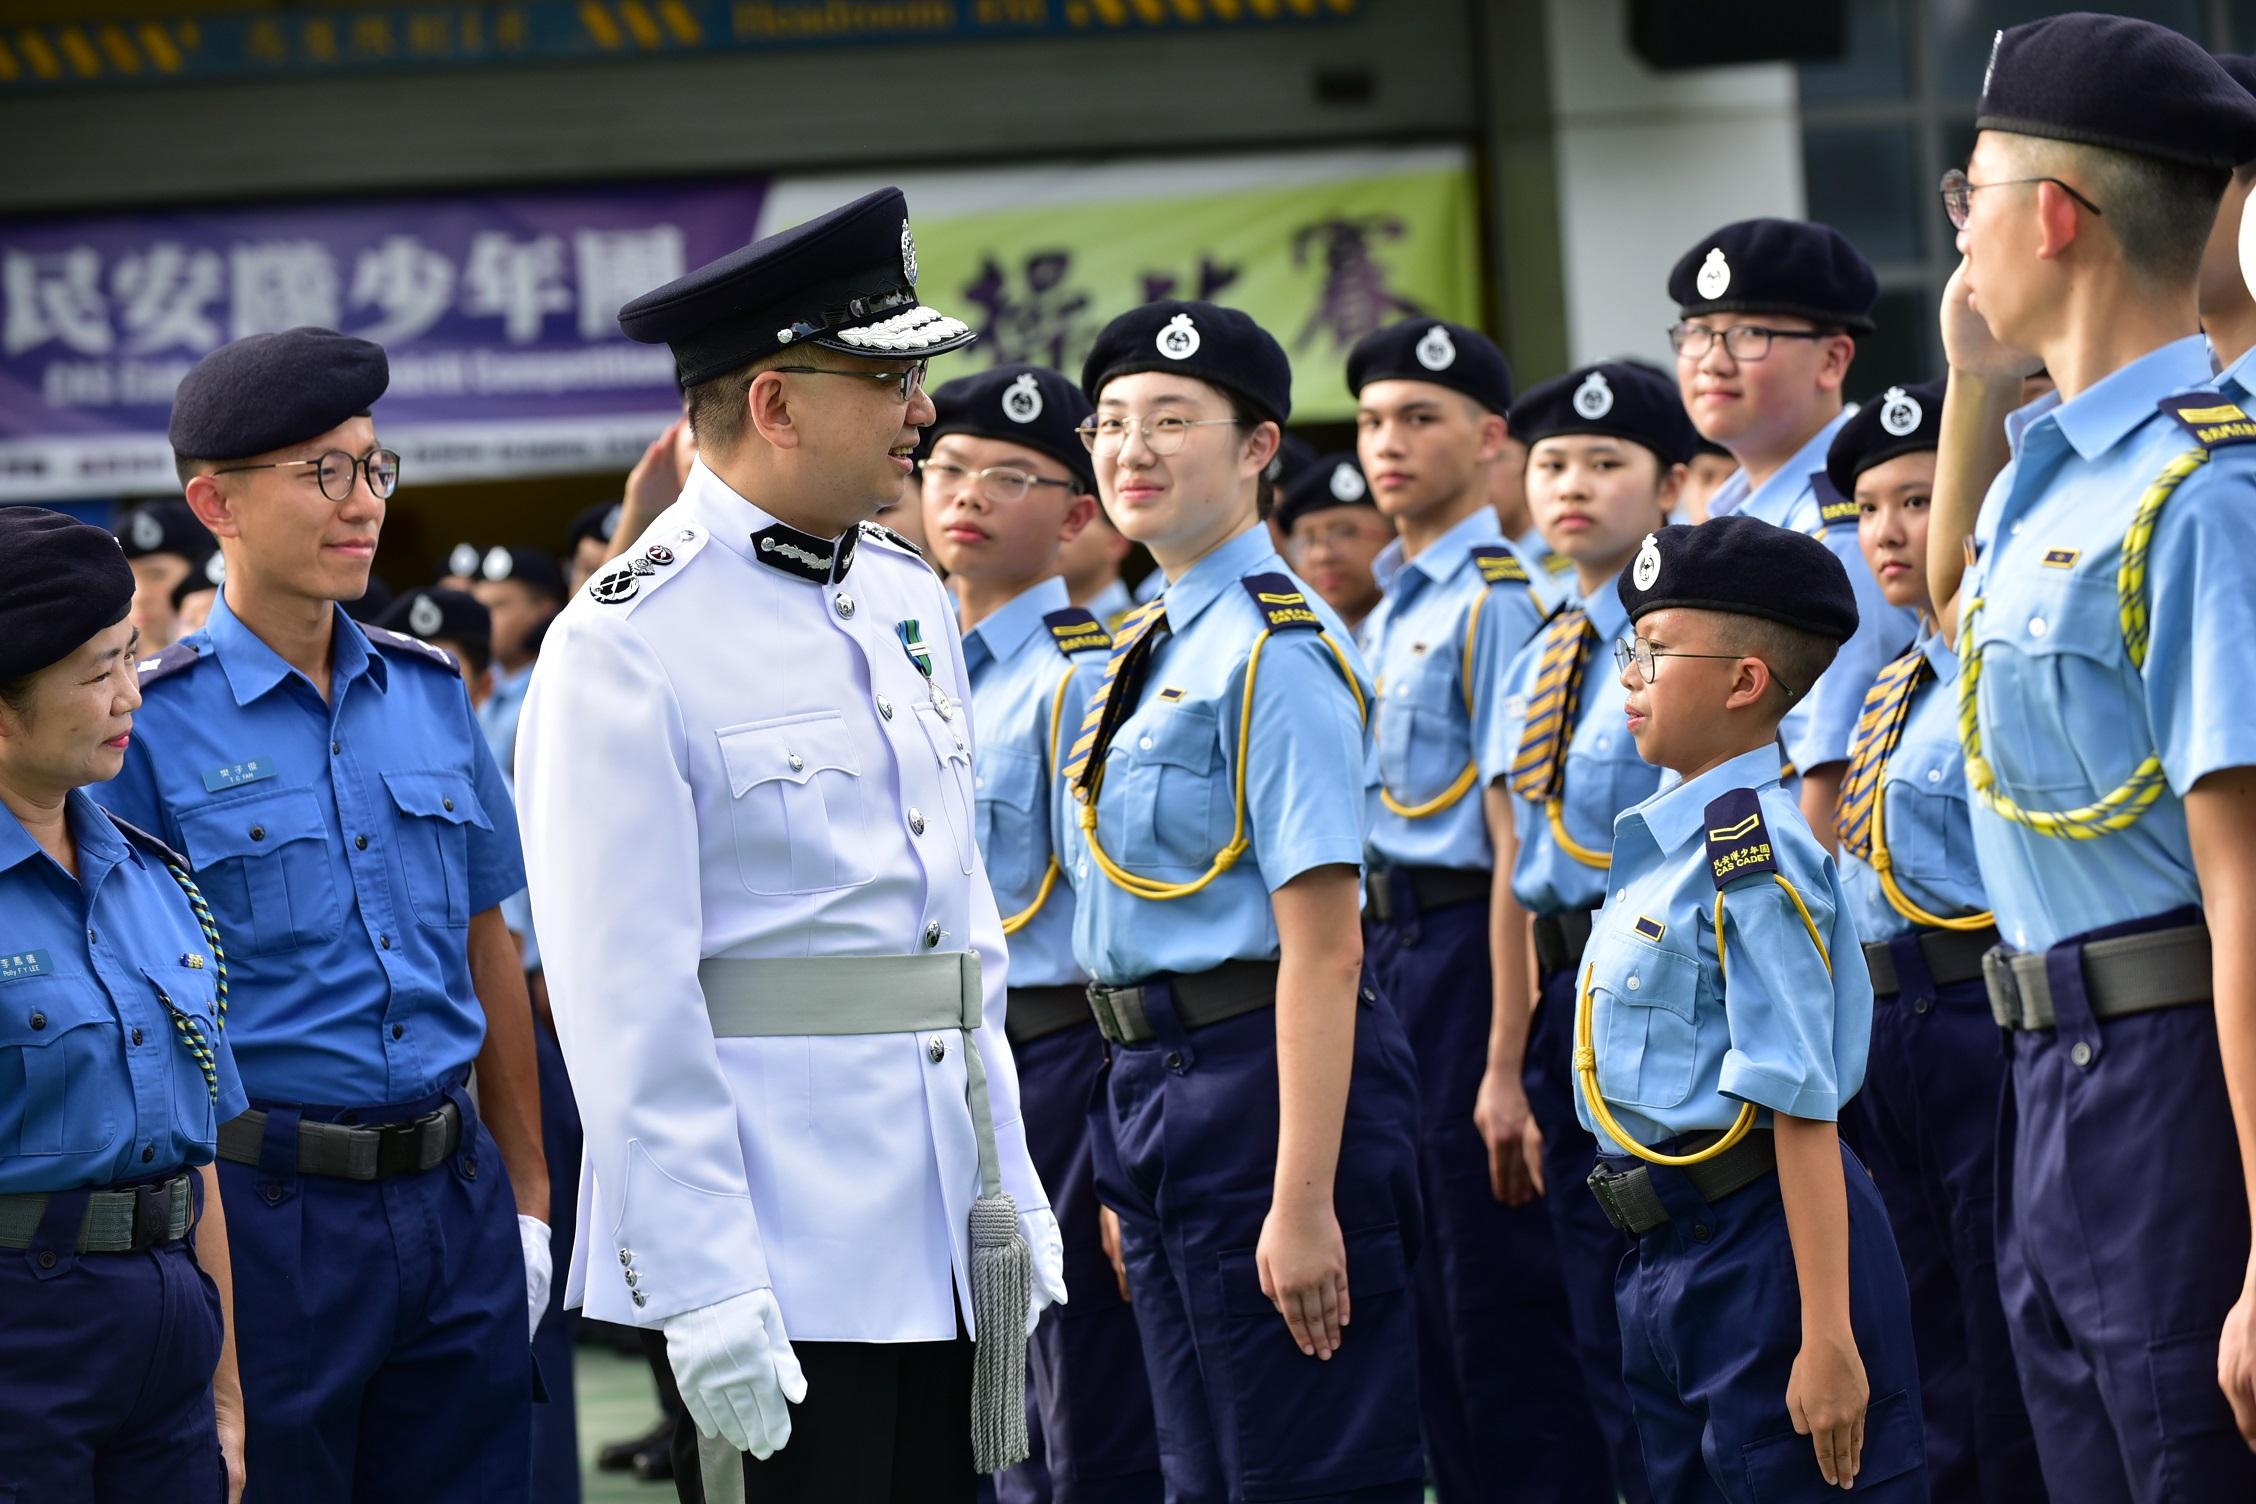 The Acting Director of Immigration, Mr Benson Kwok, reviewed the teams participating in the Civil Aid Service Cadet Corps Foot Drill Competition 2023 today (August 27).